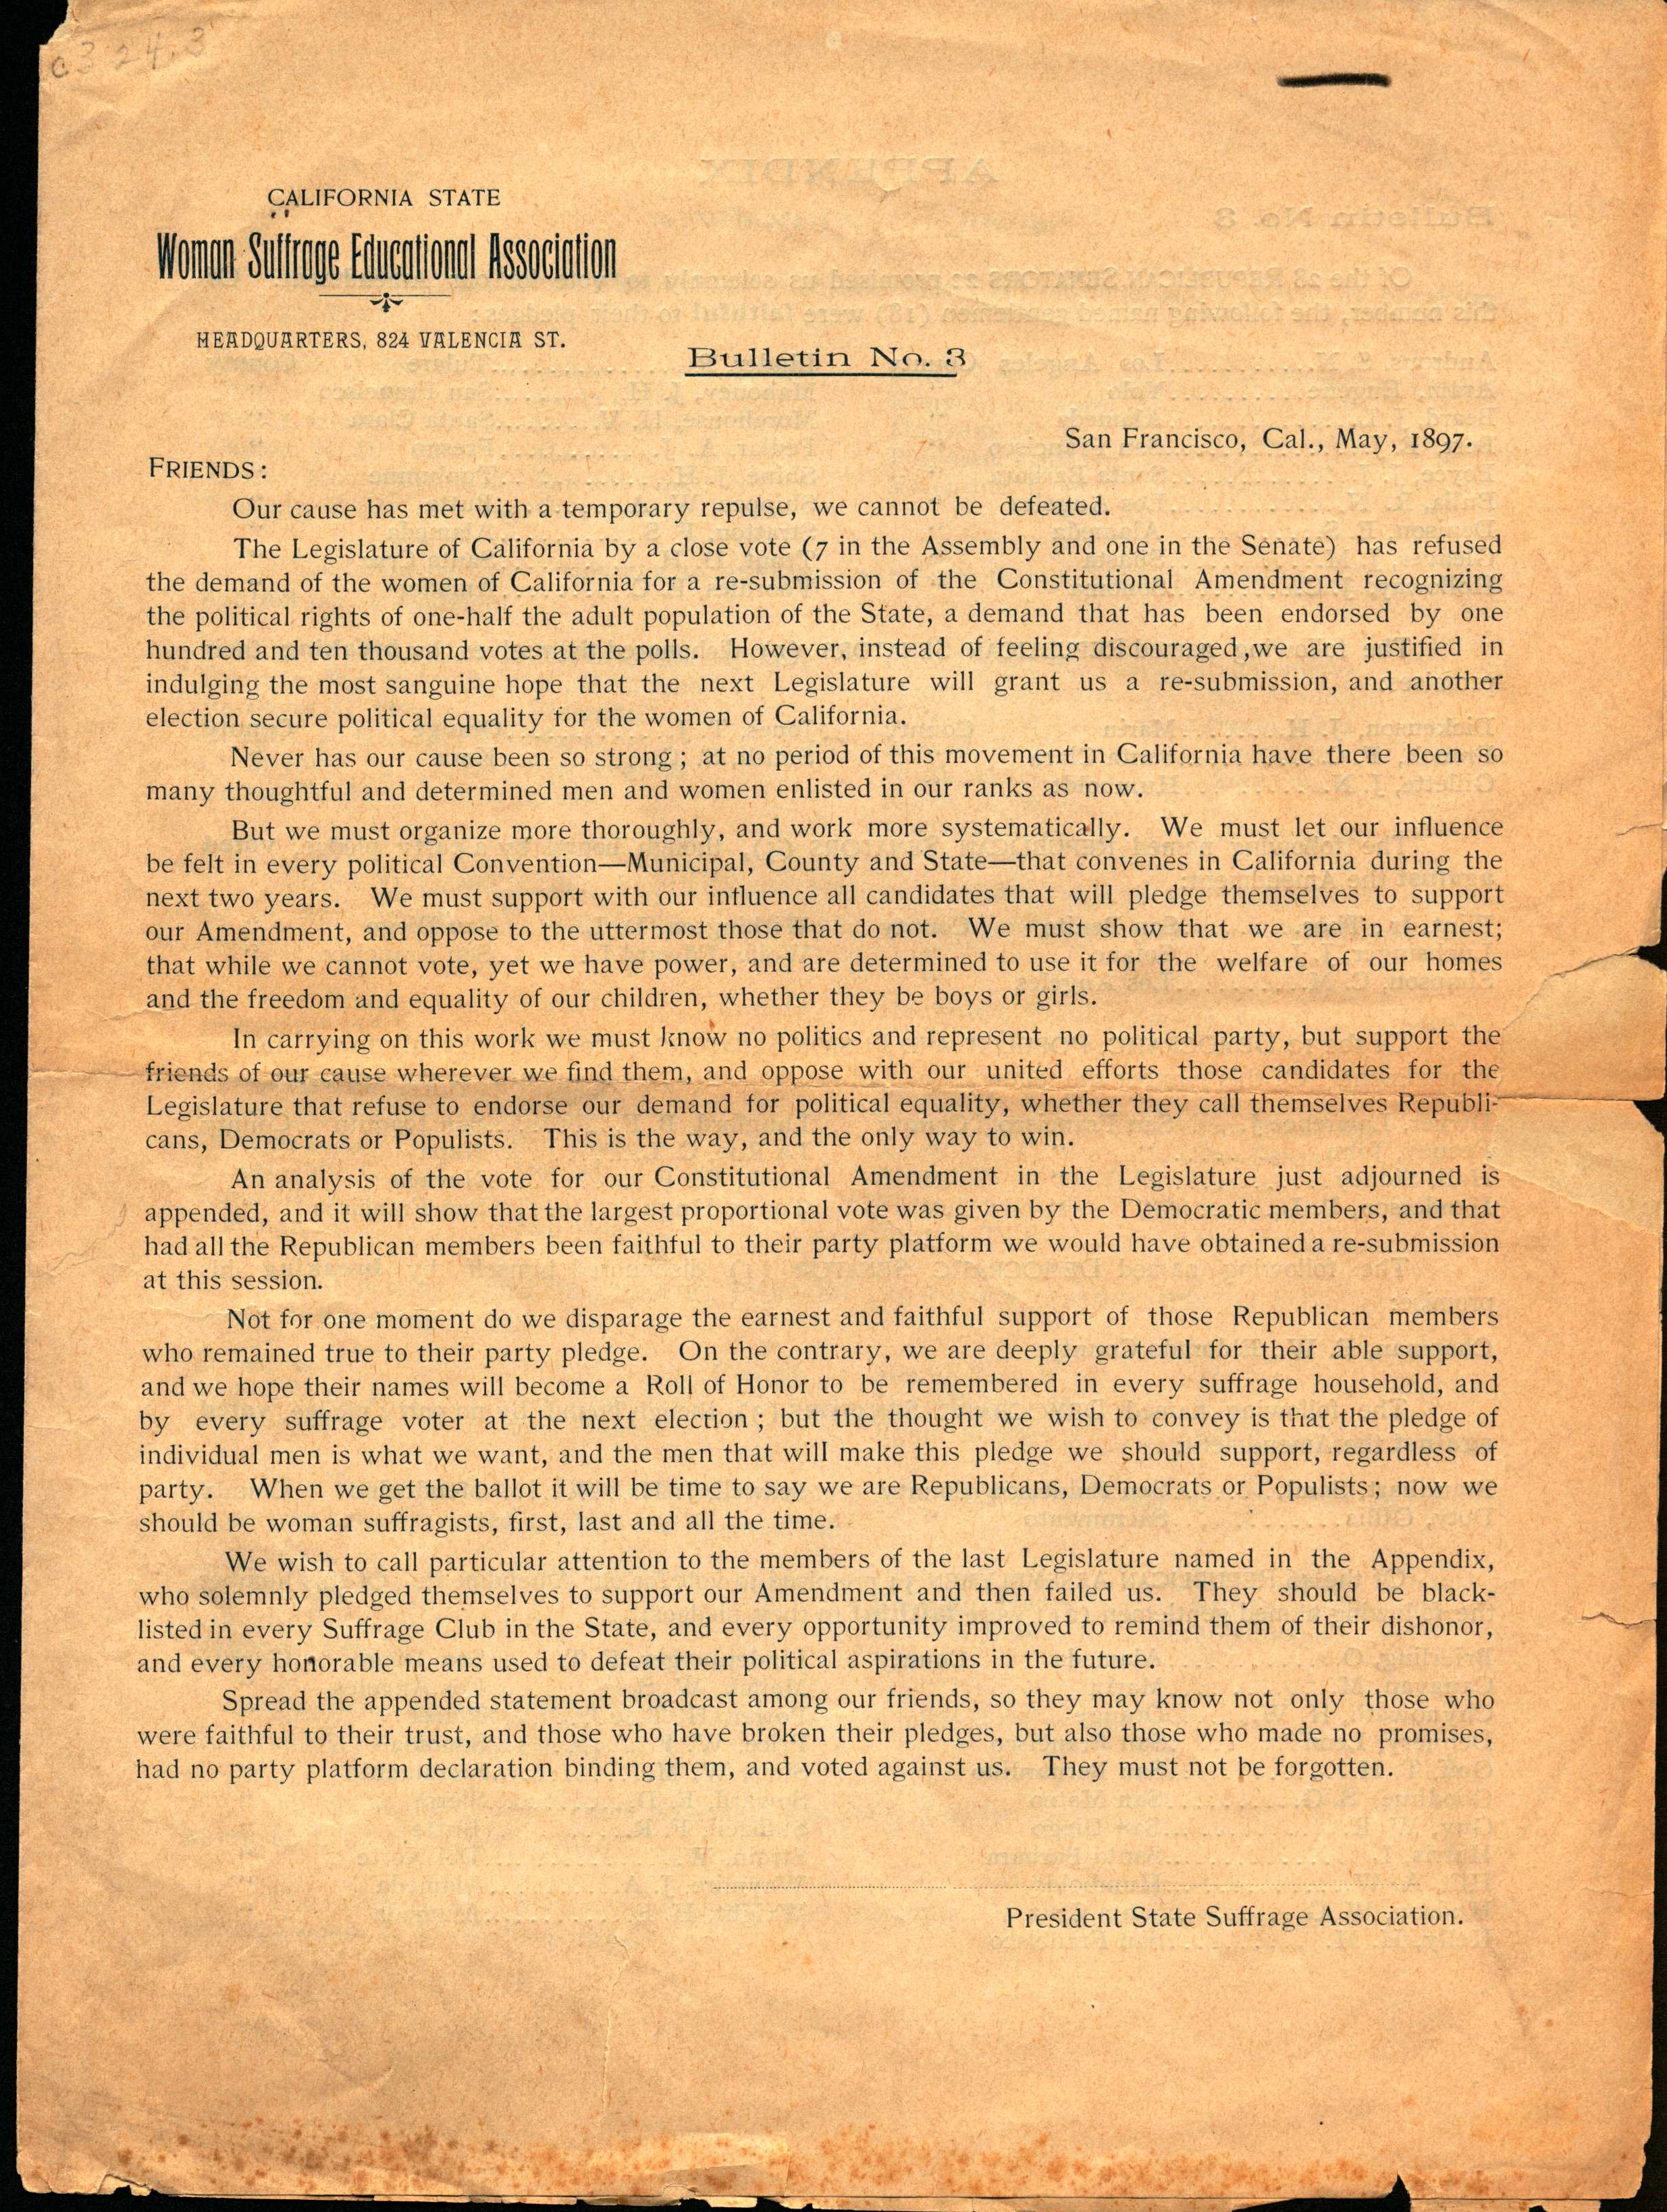 Shows the title and first page of the bulletin.